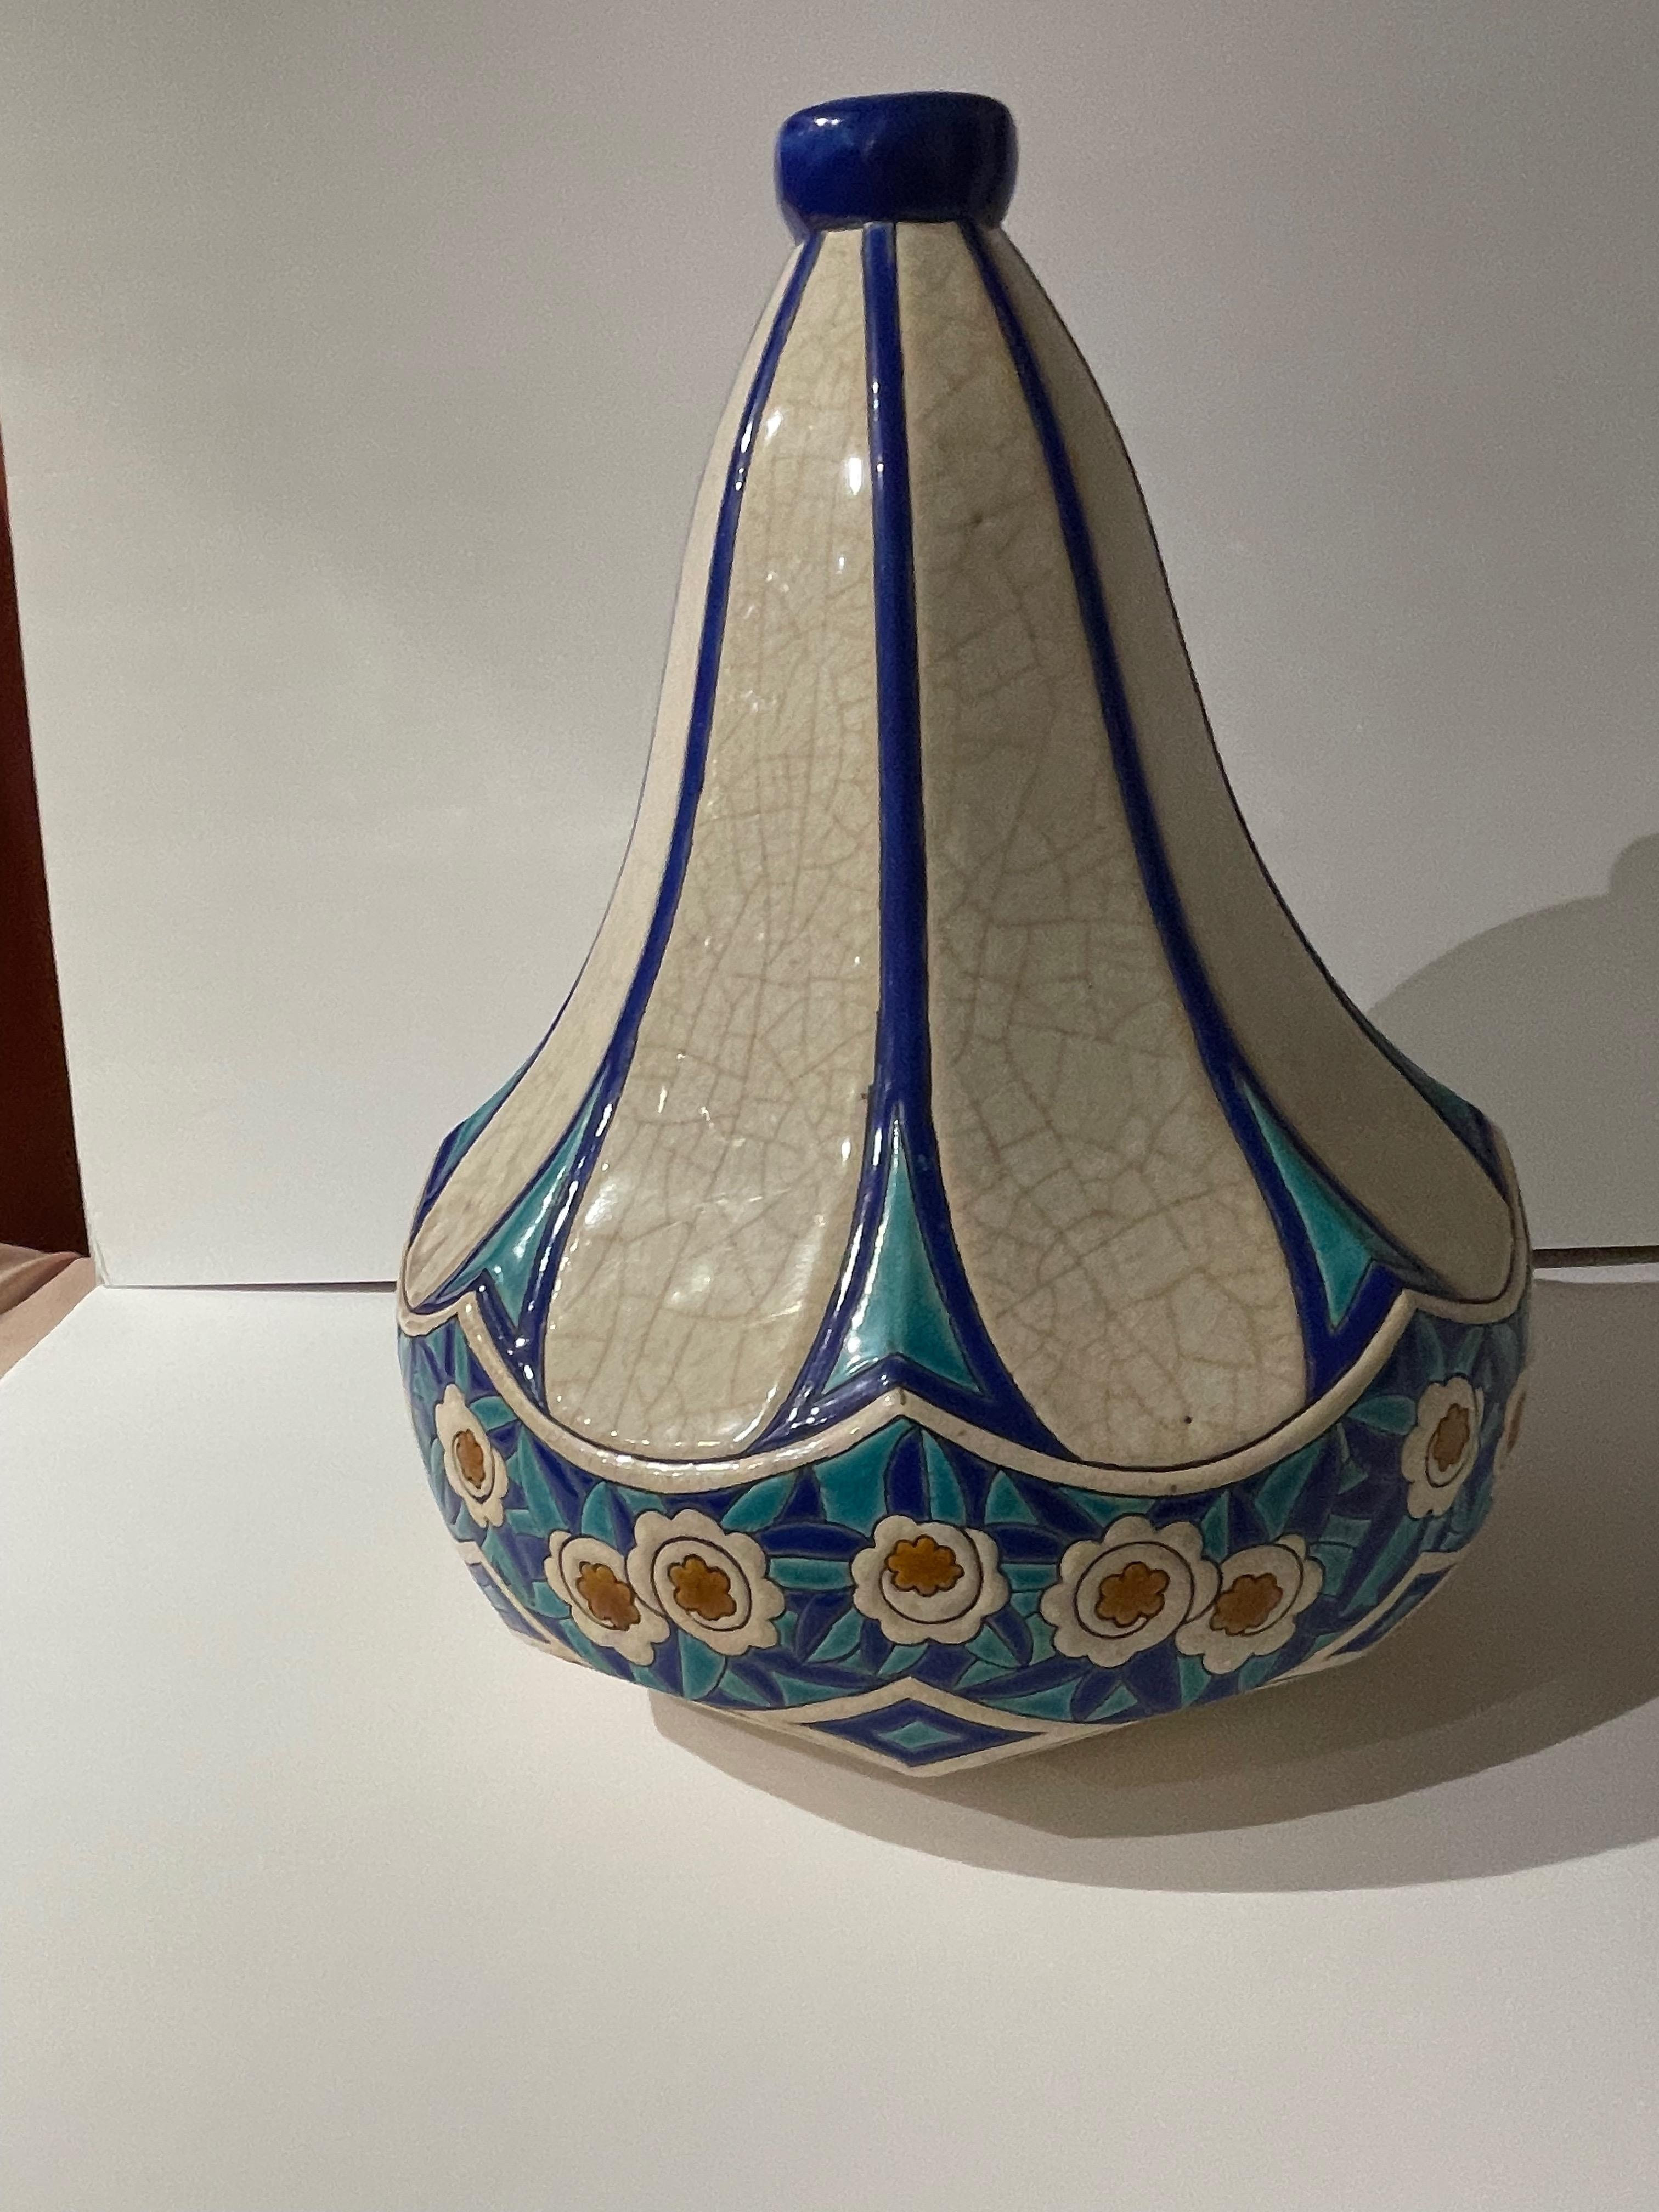 Longwy Art Deco French Cloisonné Ceramic Geometric Gourd Shape, Ex. Large Vase, bright color with stunning blues, classic gourd shape. Repeated floral and leaf designs with bright colors, blues, and crackle cream to create a dynamic pattern rarely